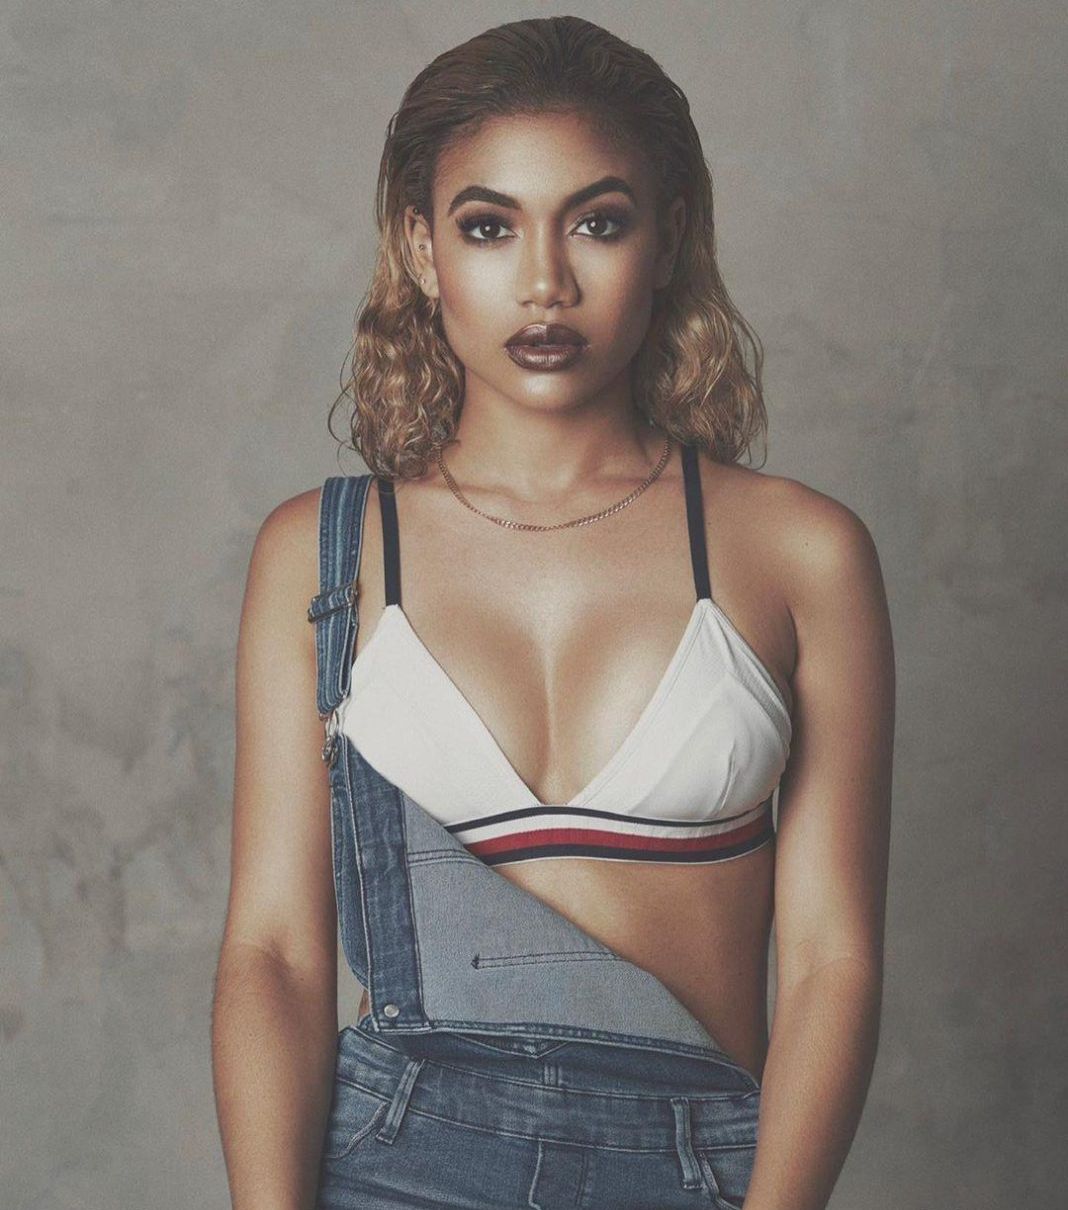 51 Paige Hurd Nude Pictures Which Makes Her An Enigmatic Glamor Quotient 45